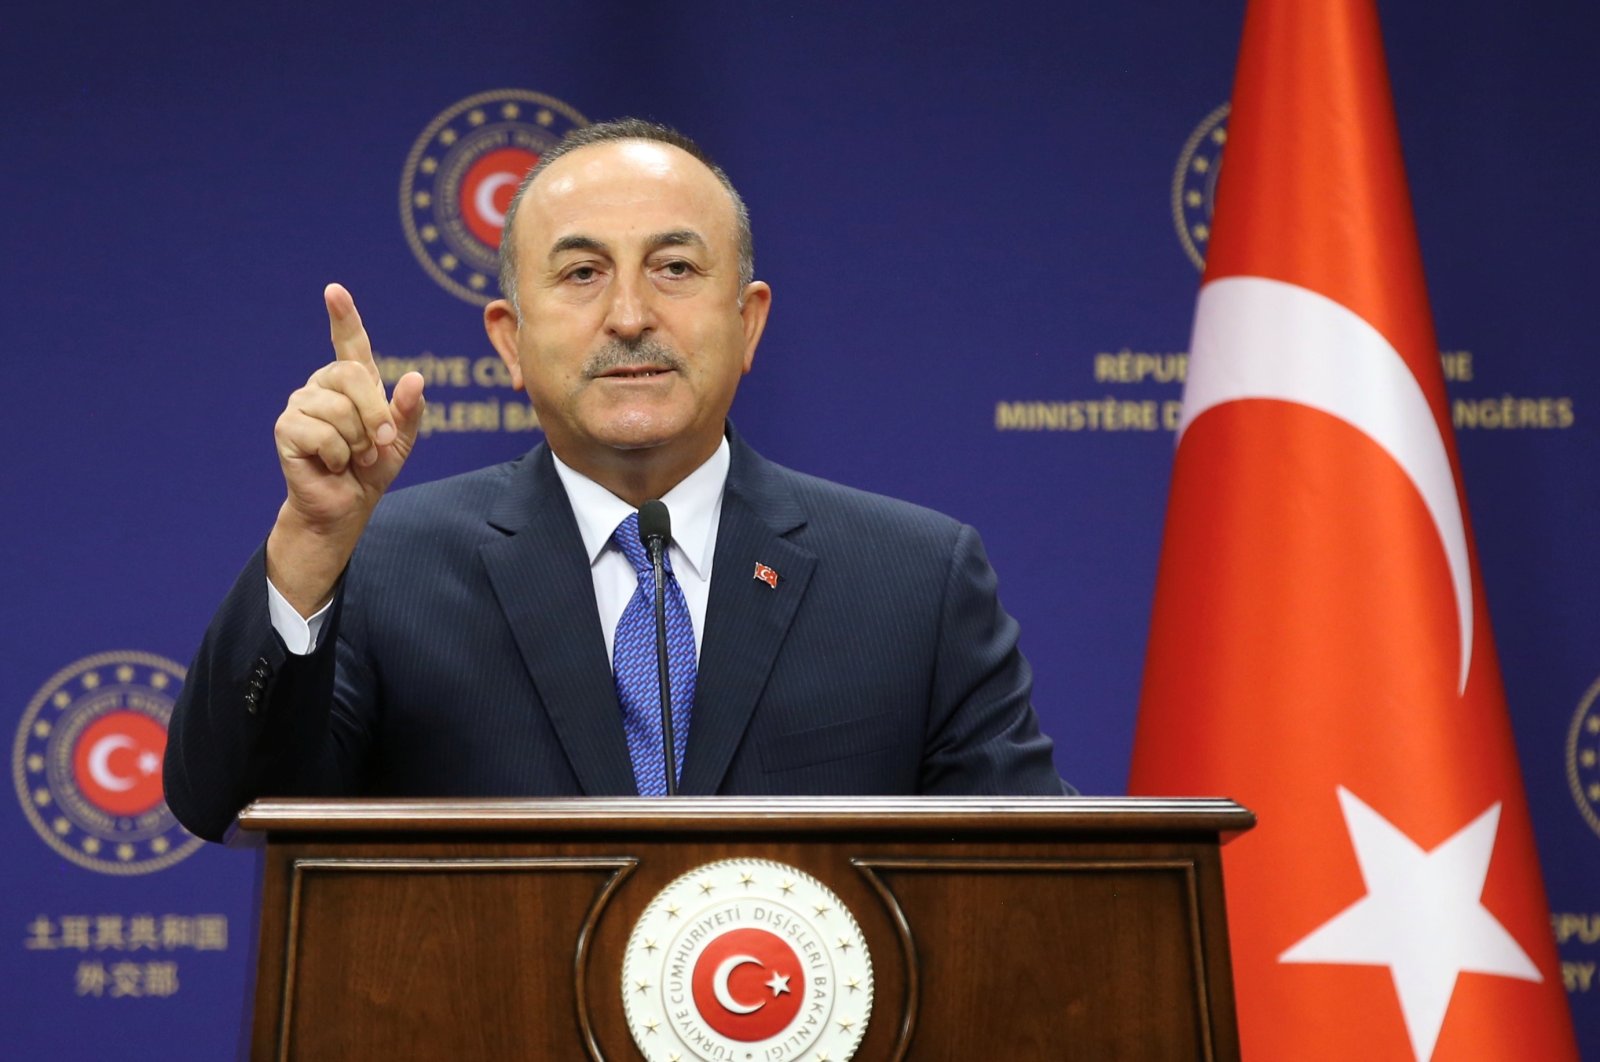 Turkish Foreign Minister Mevlüt Çavuşoğlu in a press conference in Ankara, Turkey, Aug. 25, 2020. (Photo by Foreign Ministry via Reuters)